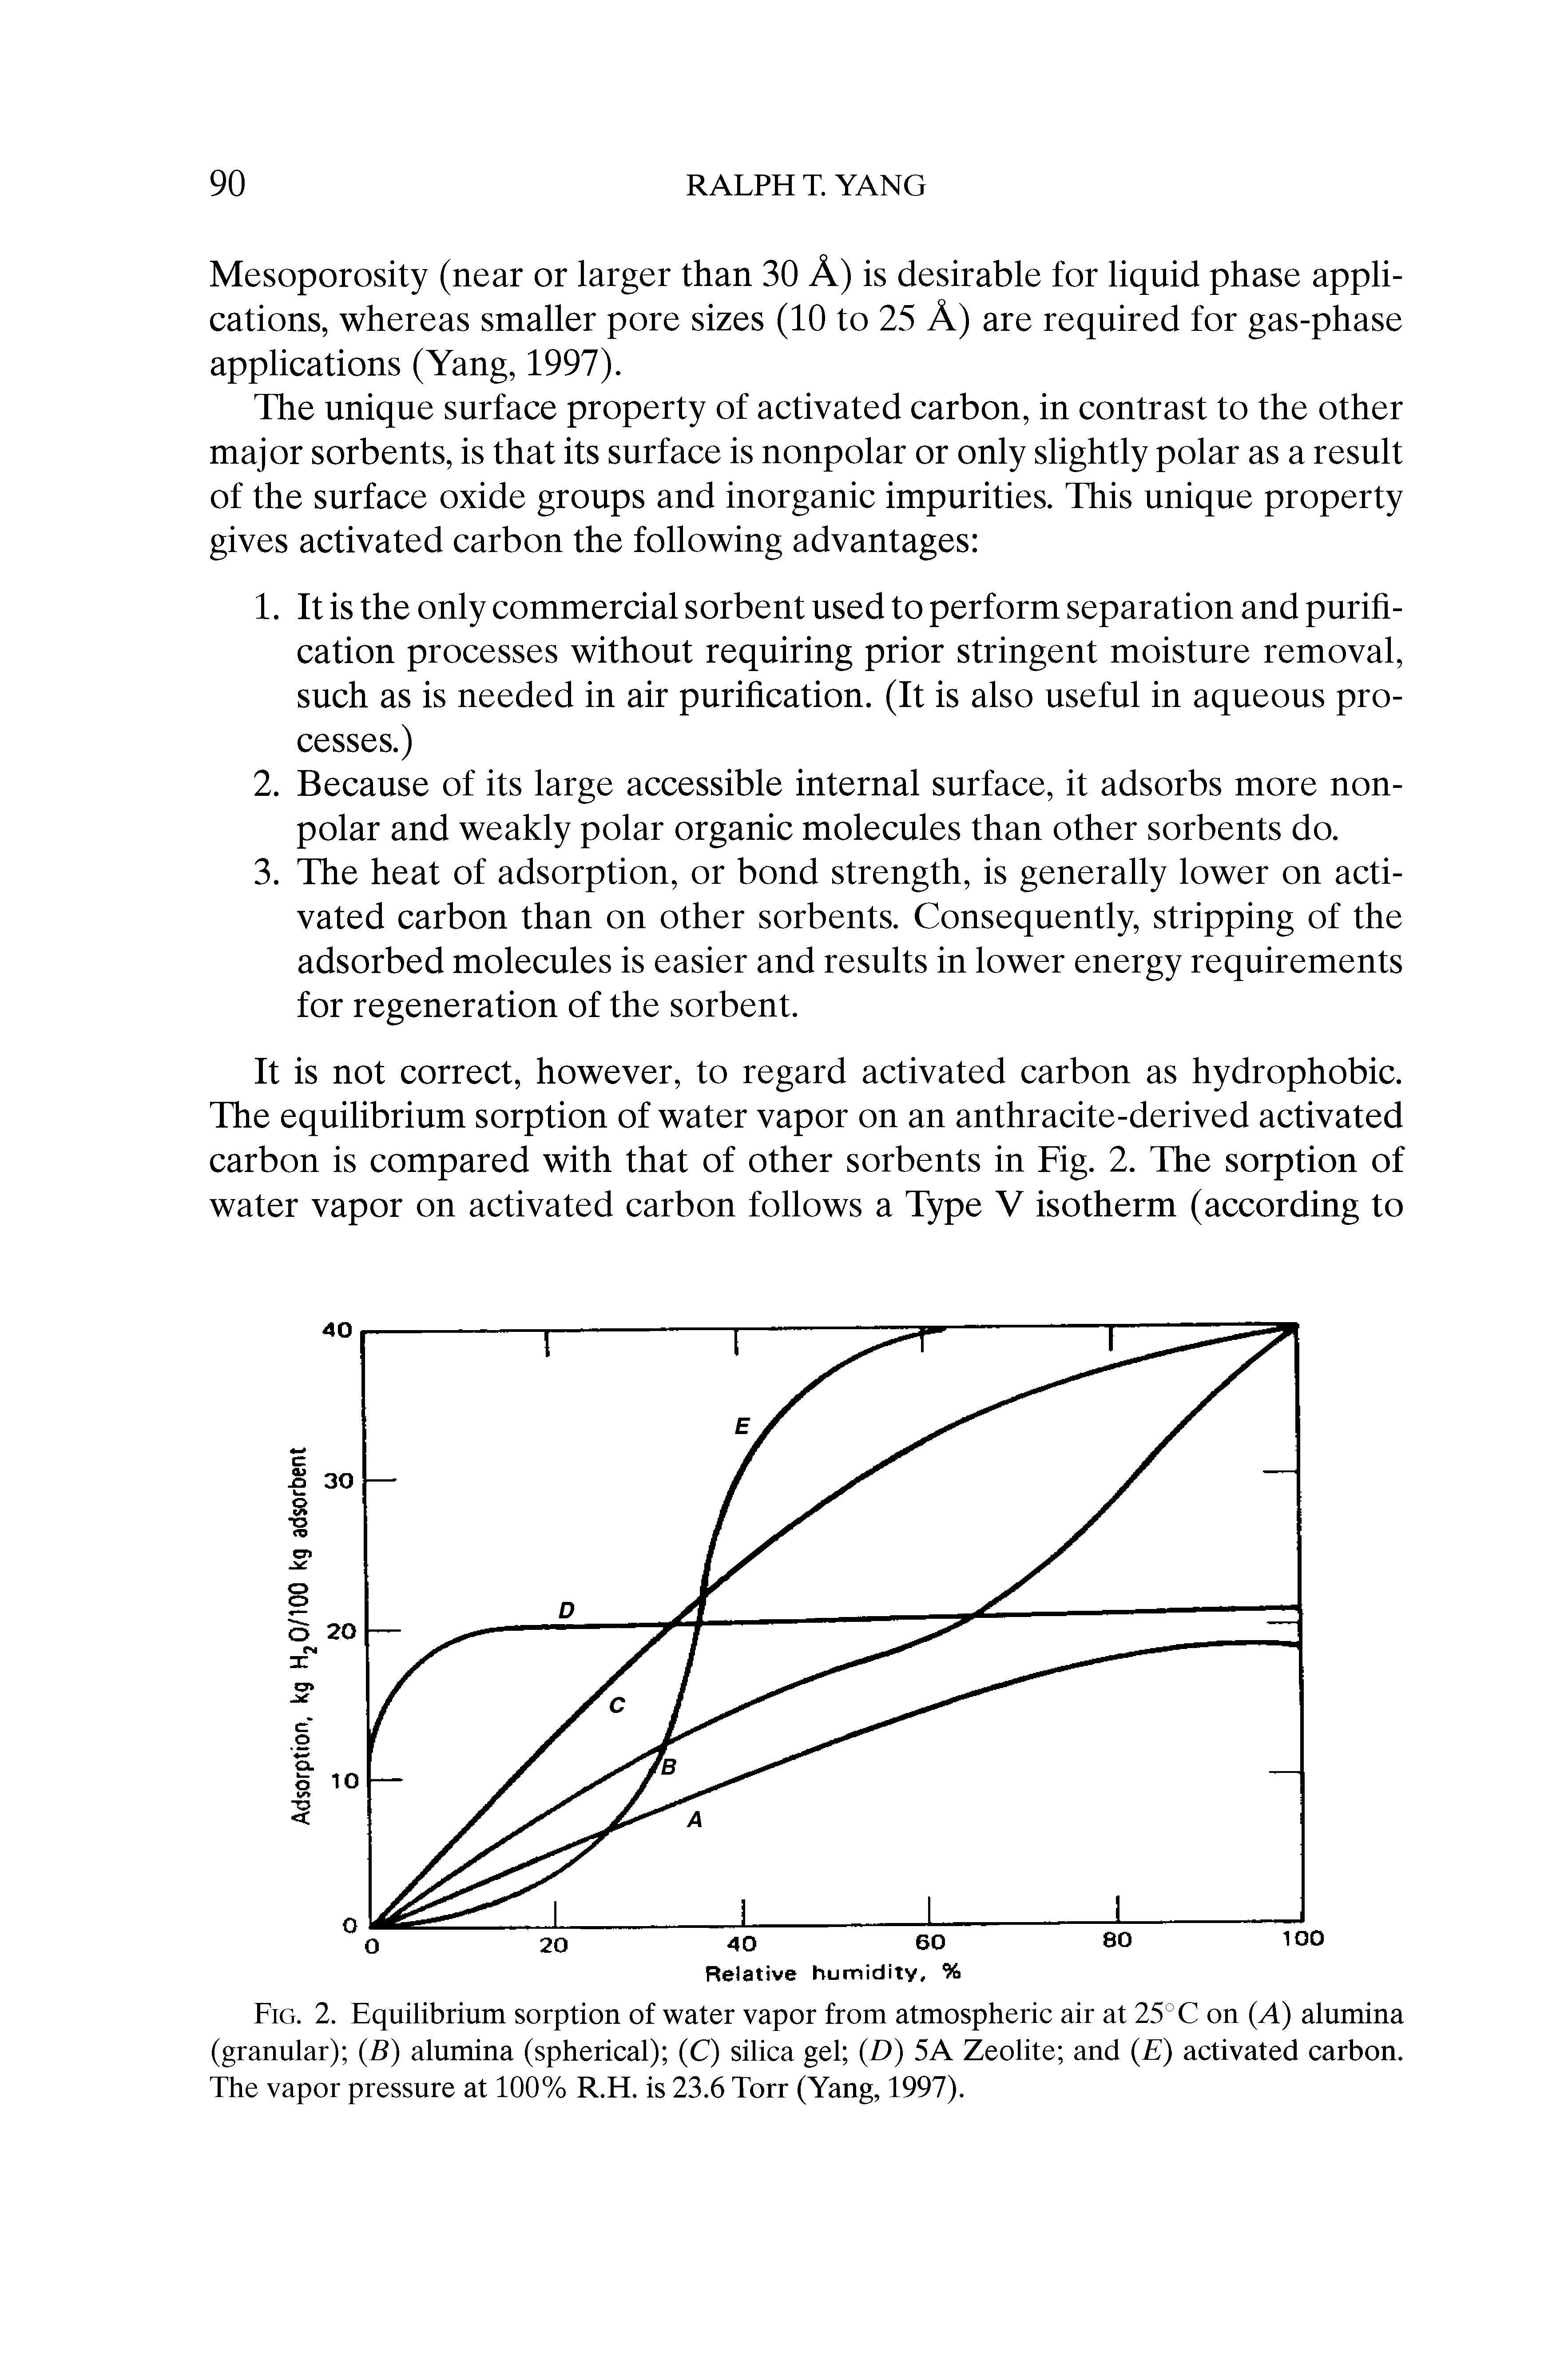 Fig. 2. Equilibrium sorption of water vapor from atmospheric air at 25° C on (A) alumina (granular) (B) alumina (spherical) (C) silica gel (D) 5A Zeolite and (E) activated carbon. The vapor pressure at 100% R.H. is 23.6 Torr (Yang, 1997).